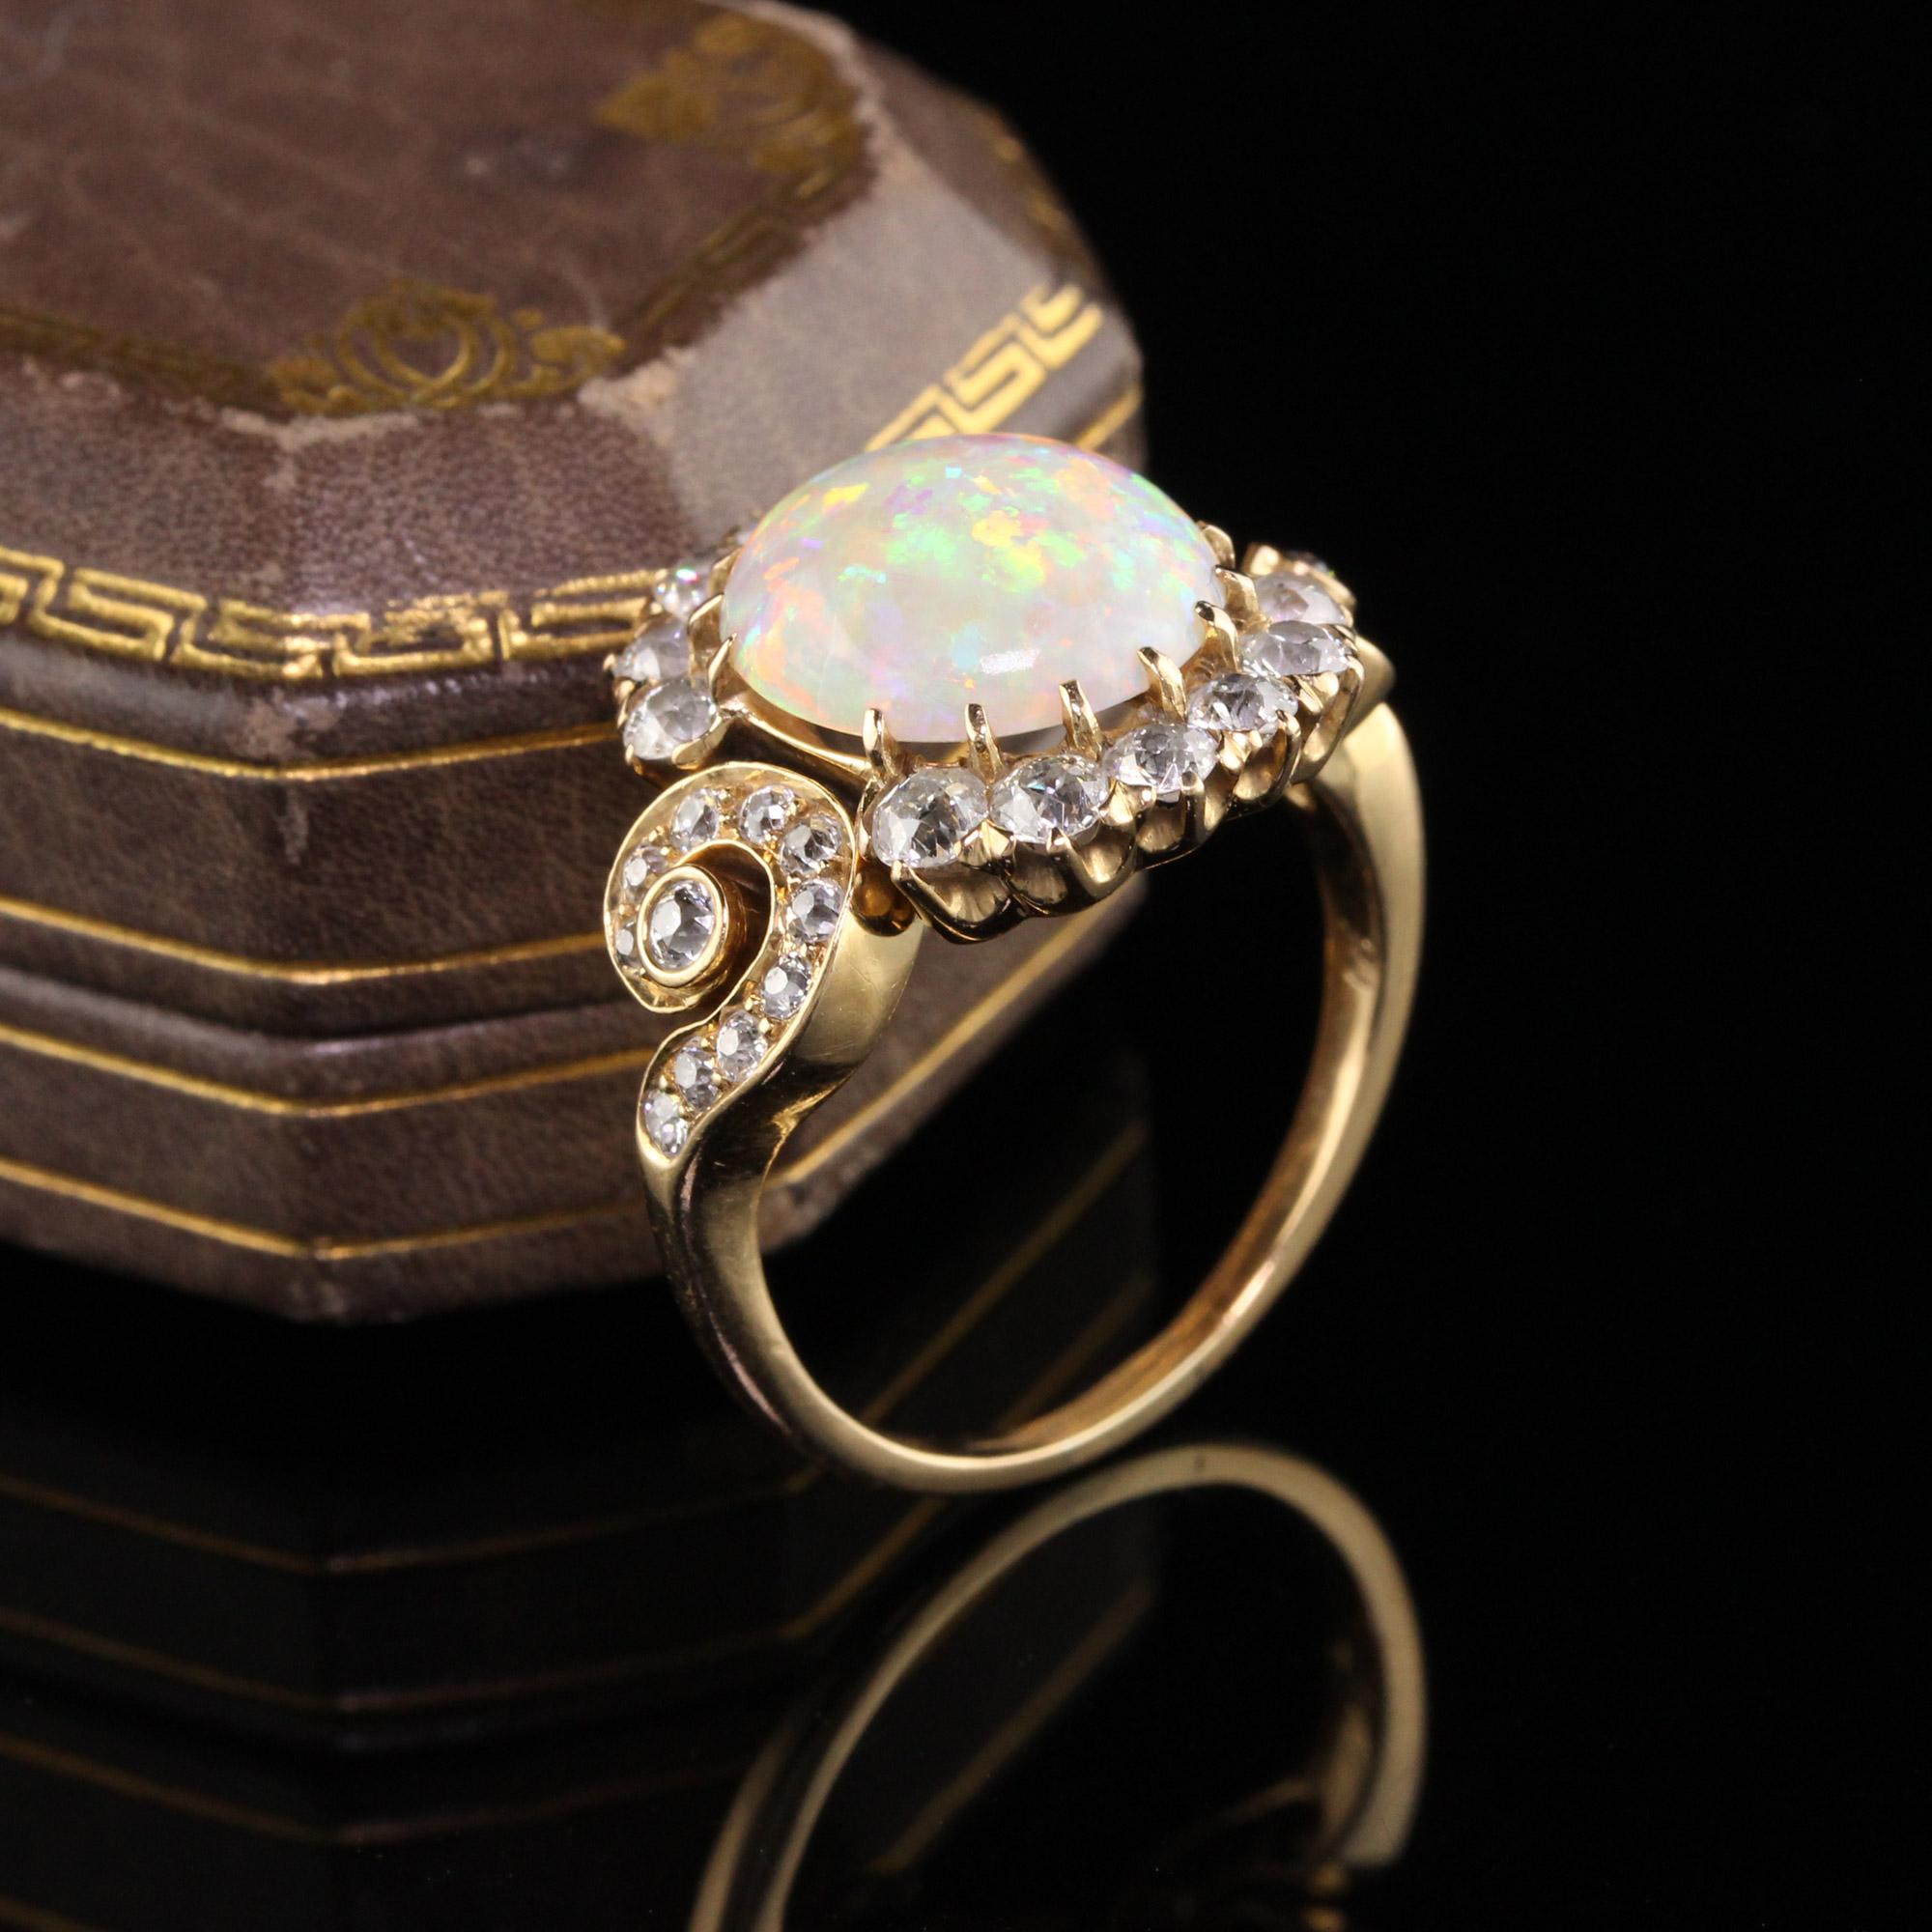 Beautiful Antique Victorian 18K Yellow Gold Old Mine Diamond and Opal Ring. This unbelievable Victorian opal ring features a bright and lively opal that has a beautiful fiery play of color surrounded by chunky old mine cut diamonds. This ring is